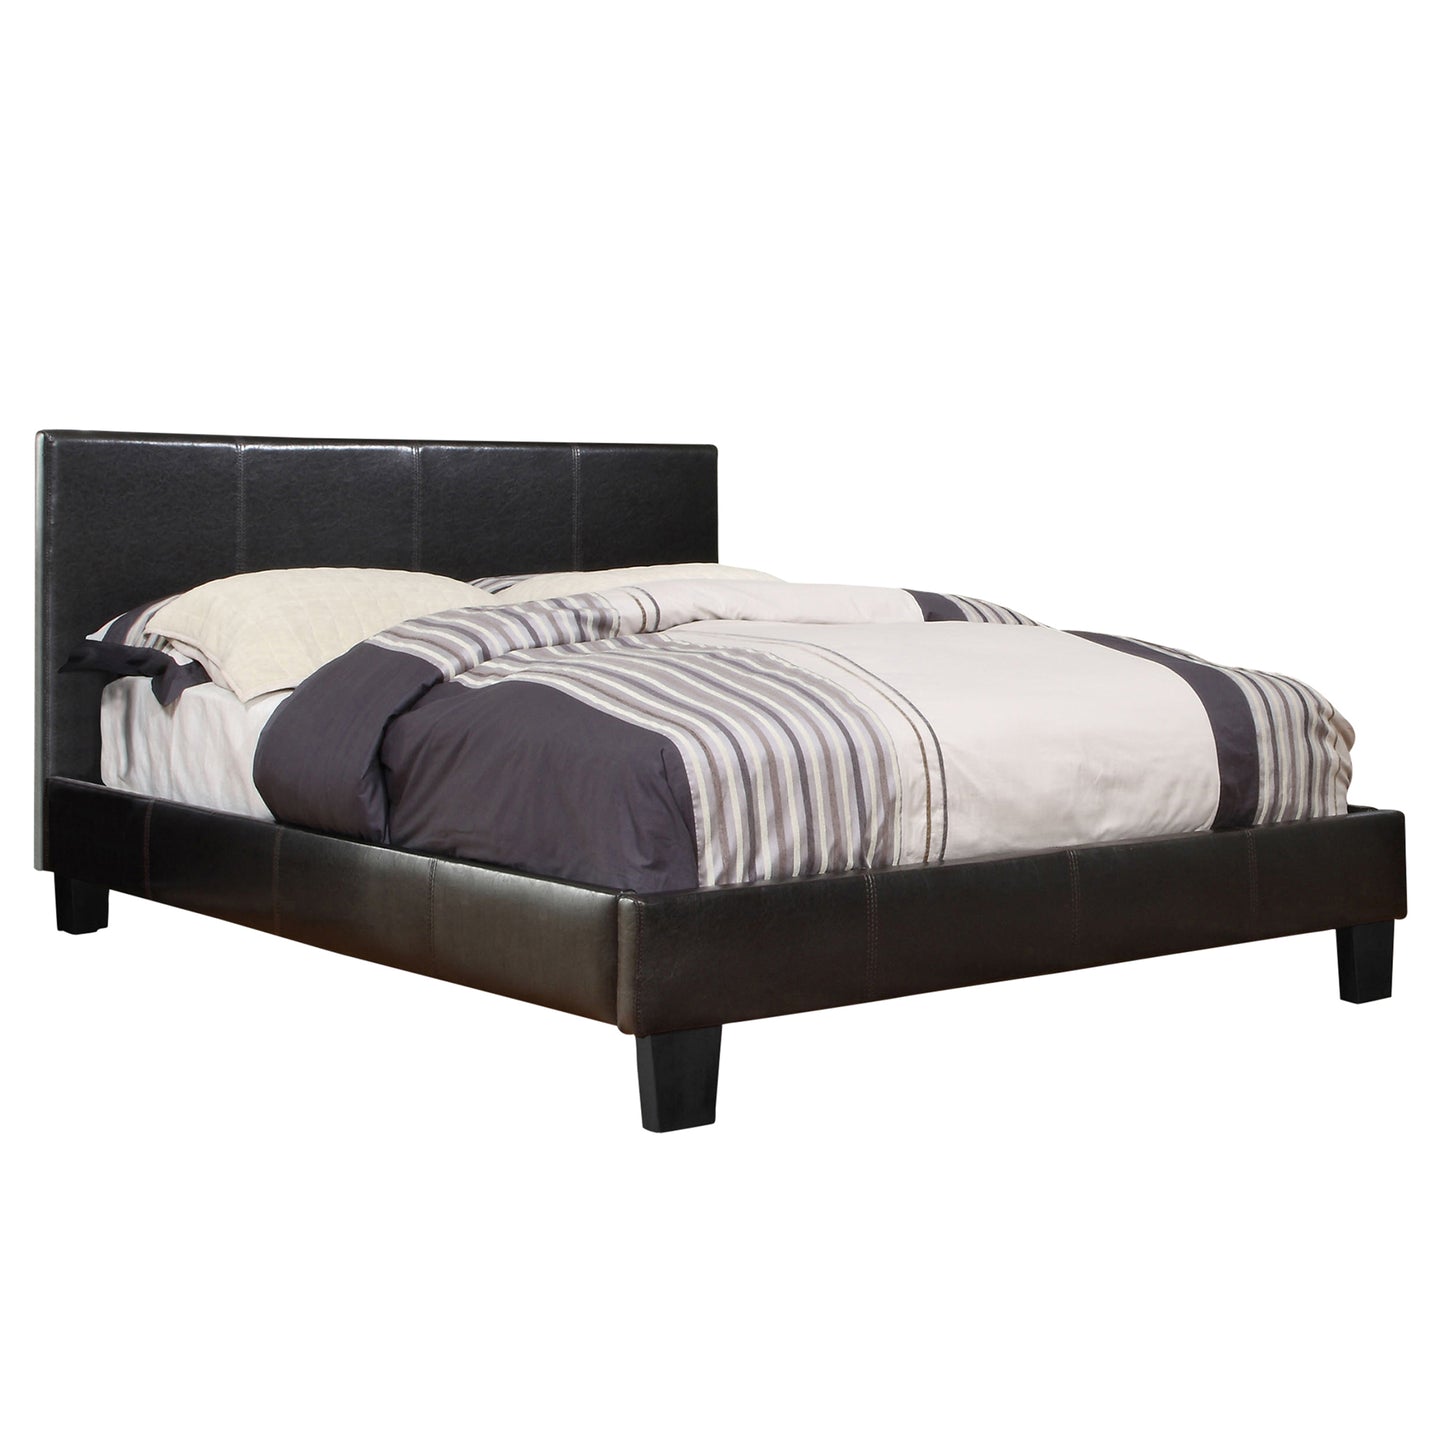 QUEEN SIZE- (VOLT ESPRESSO DISCO)- LEATHER- BED FRAME- WITH SLATS- INVENTORY CLEARANCE